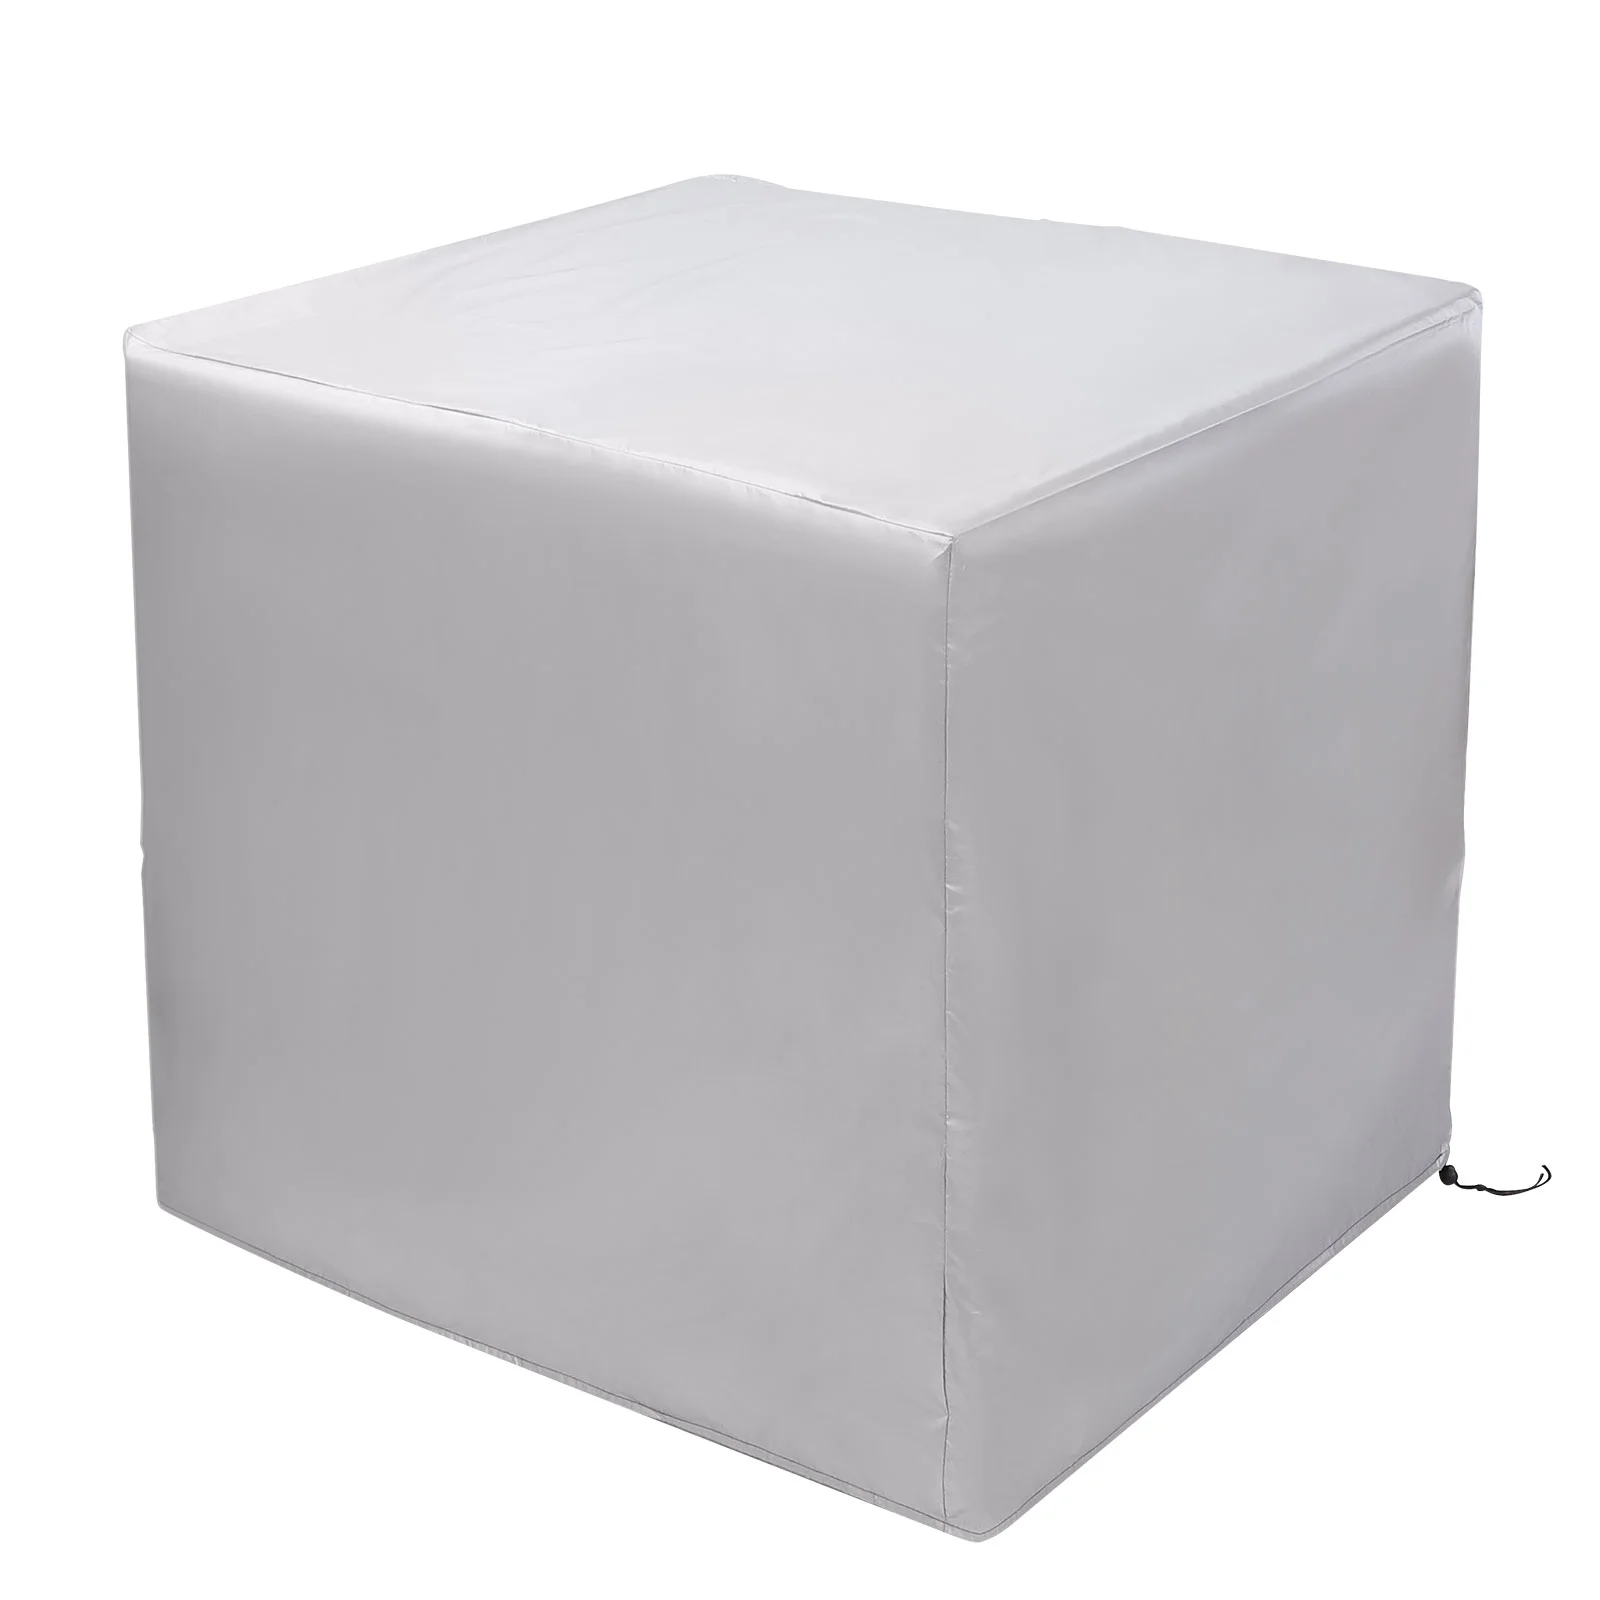 

Outdoor Dust Cover Furniture Protector Tables and Chairs Patio Covers Waterproof